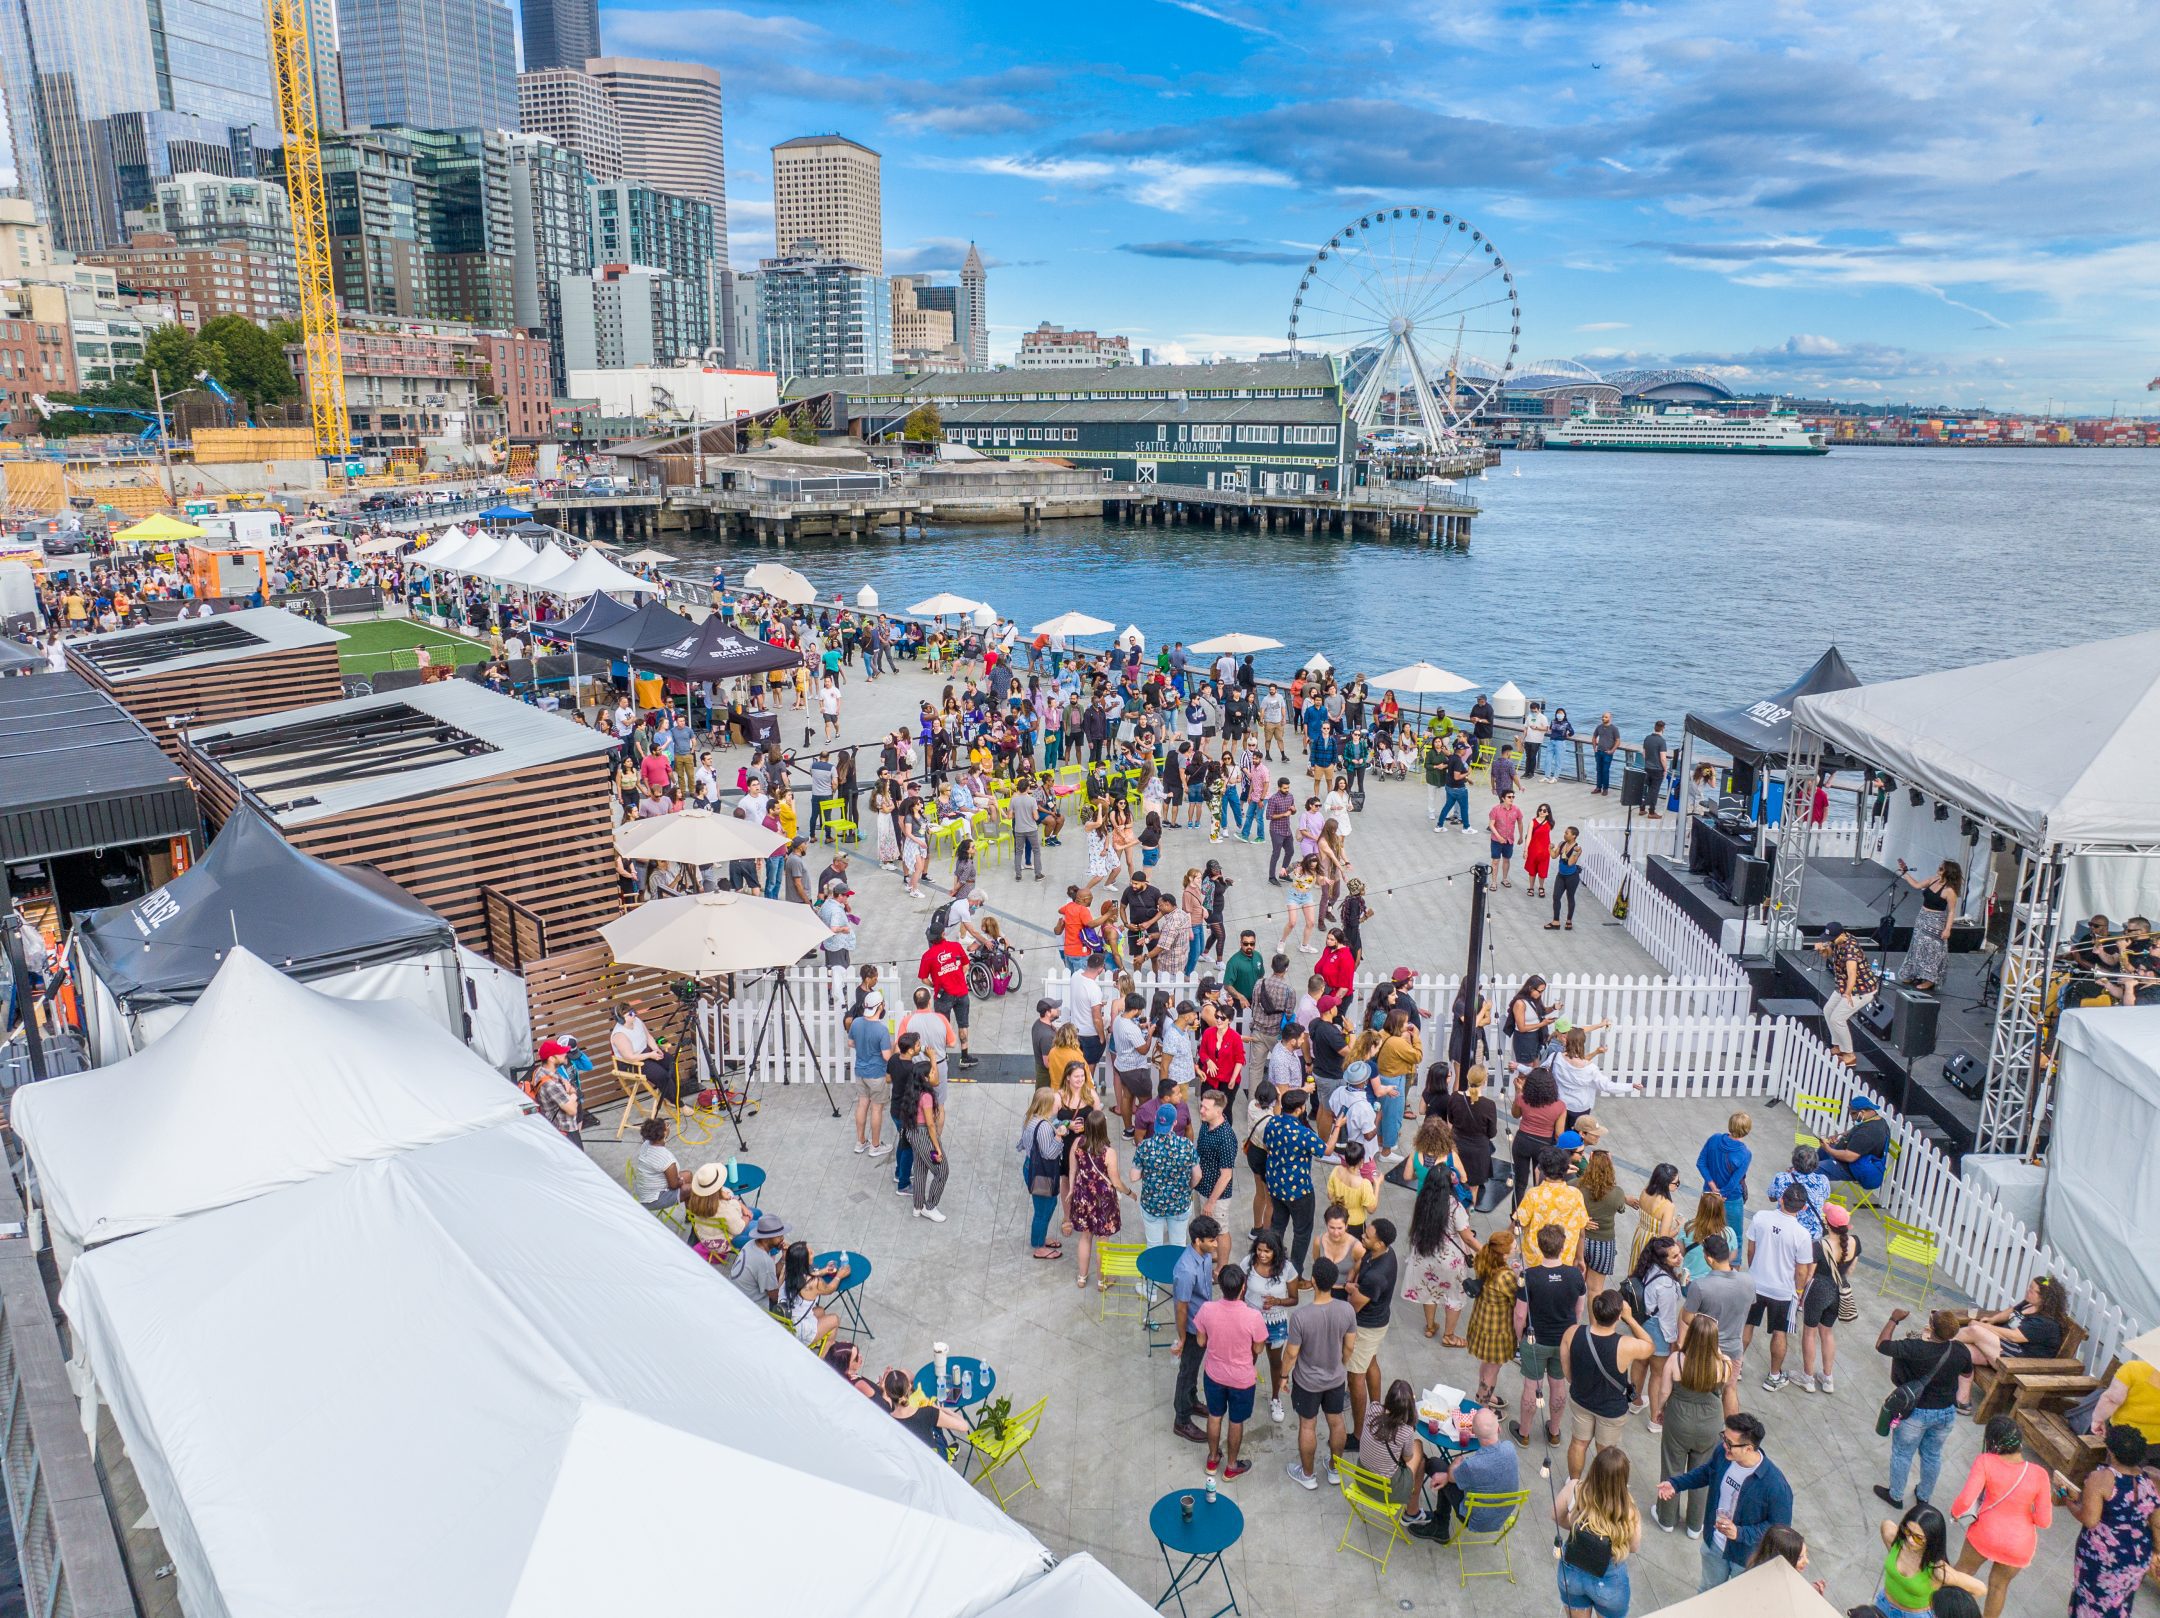 https://waterfrontparkseattle.org/wp-content/uploads/2022/07/2022-07-09_WaterfrontBlockParty_HiRes_ErikHolsather_40-2160x1618.jpg